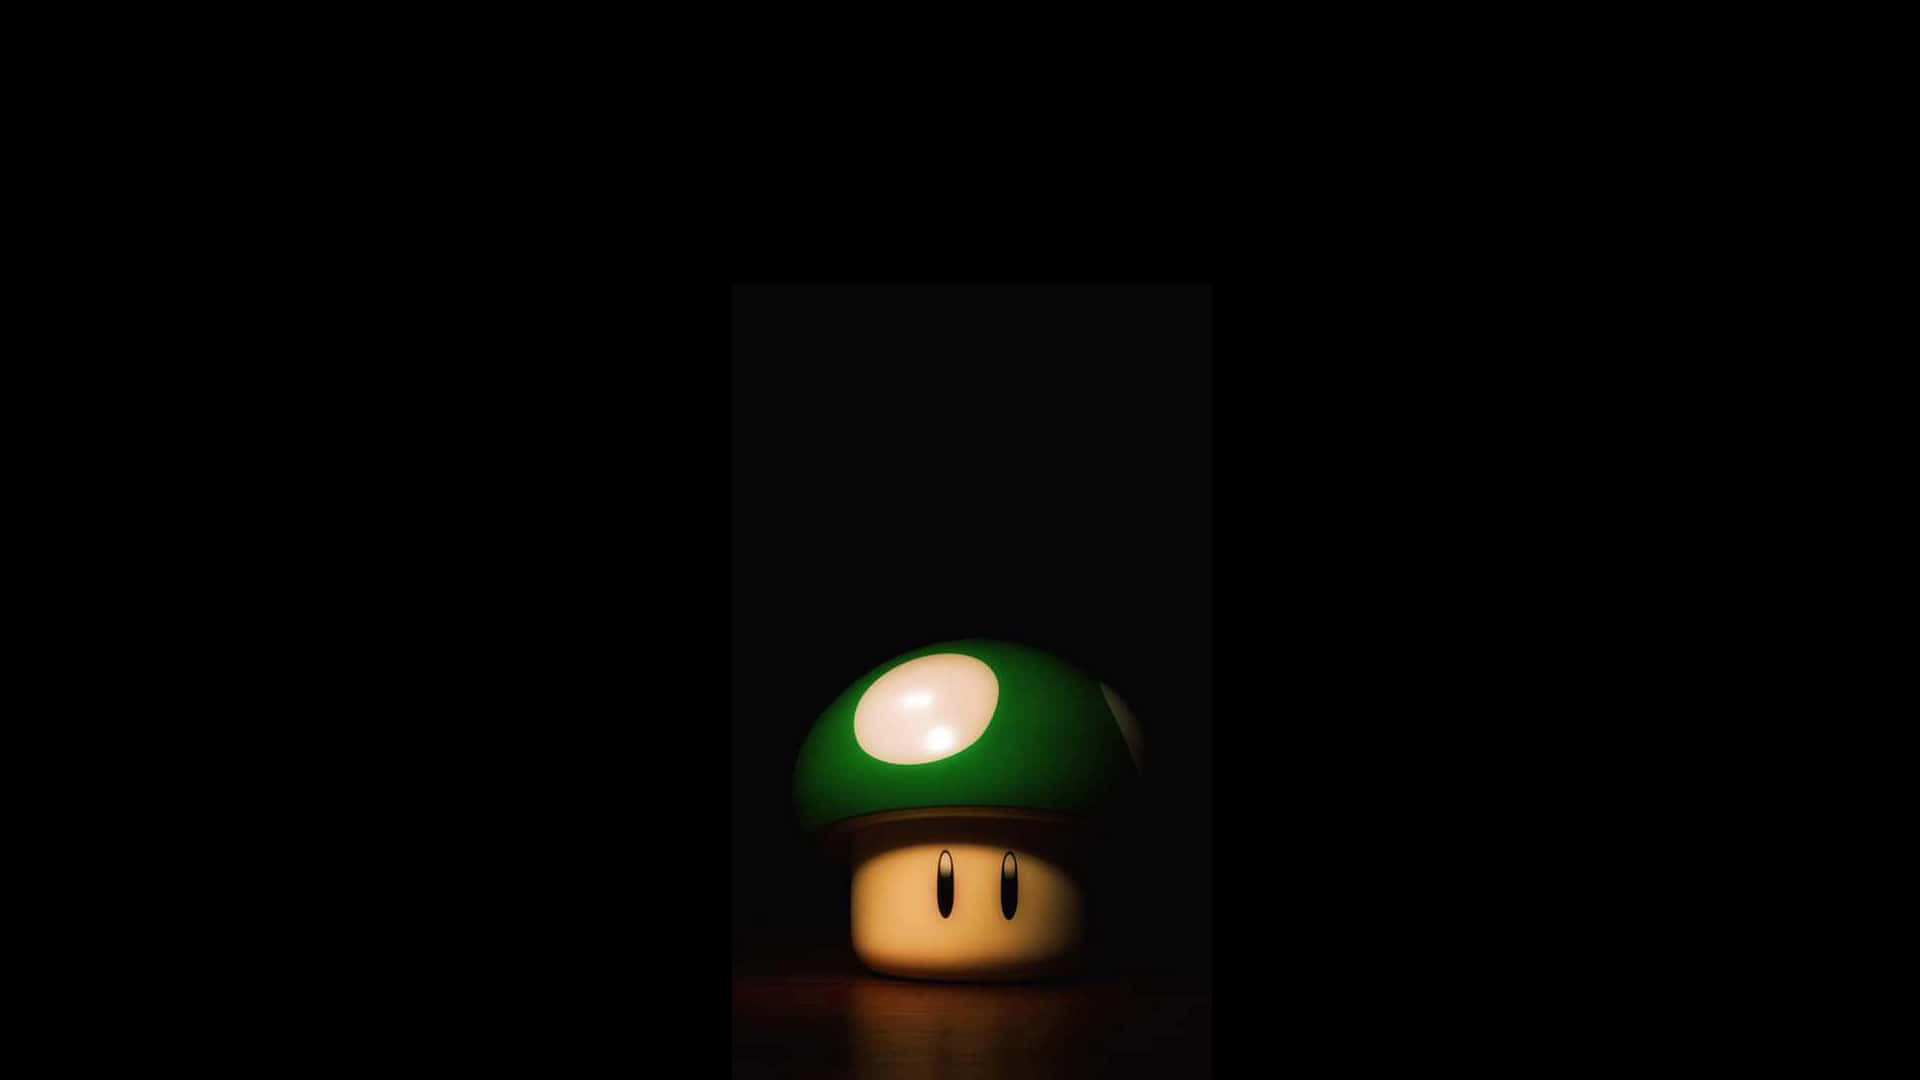 Iconic Mario Mushroom Power-Up in Action Wallpaper